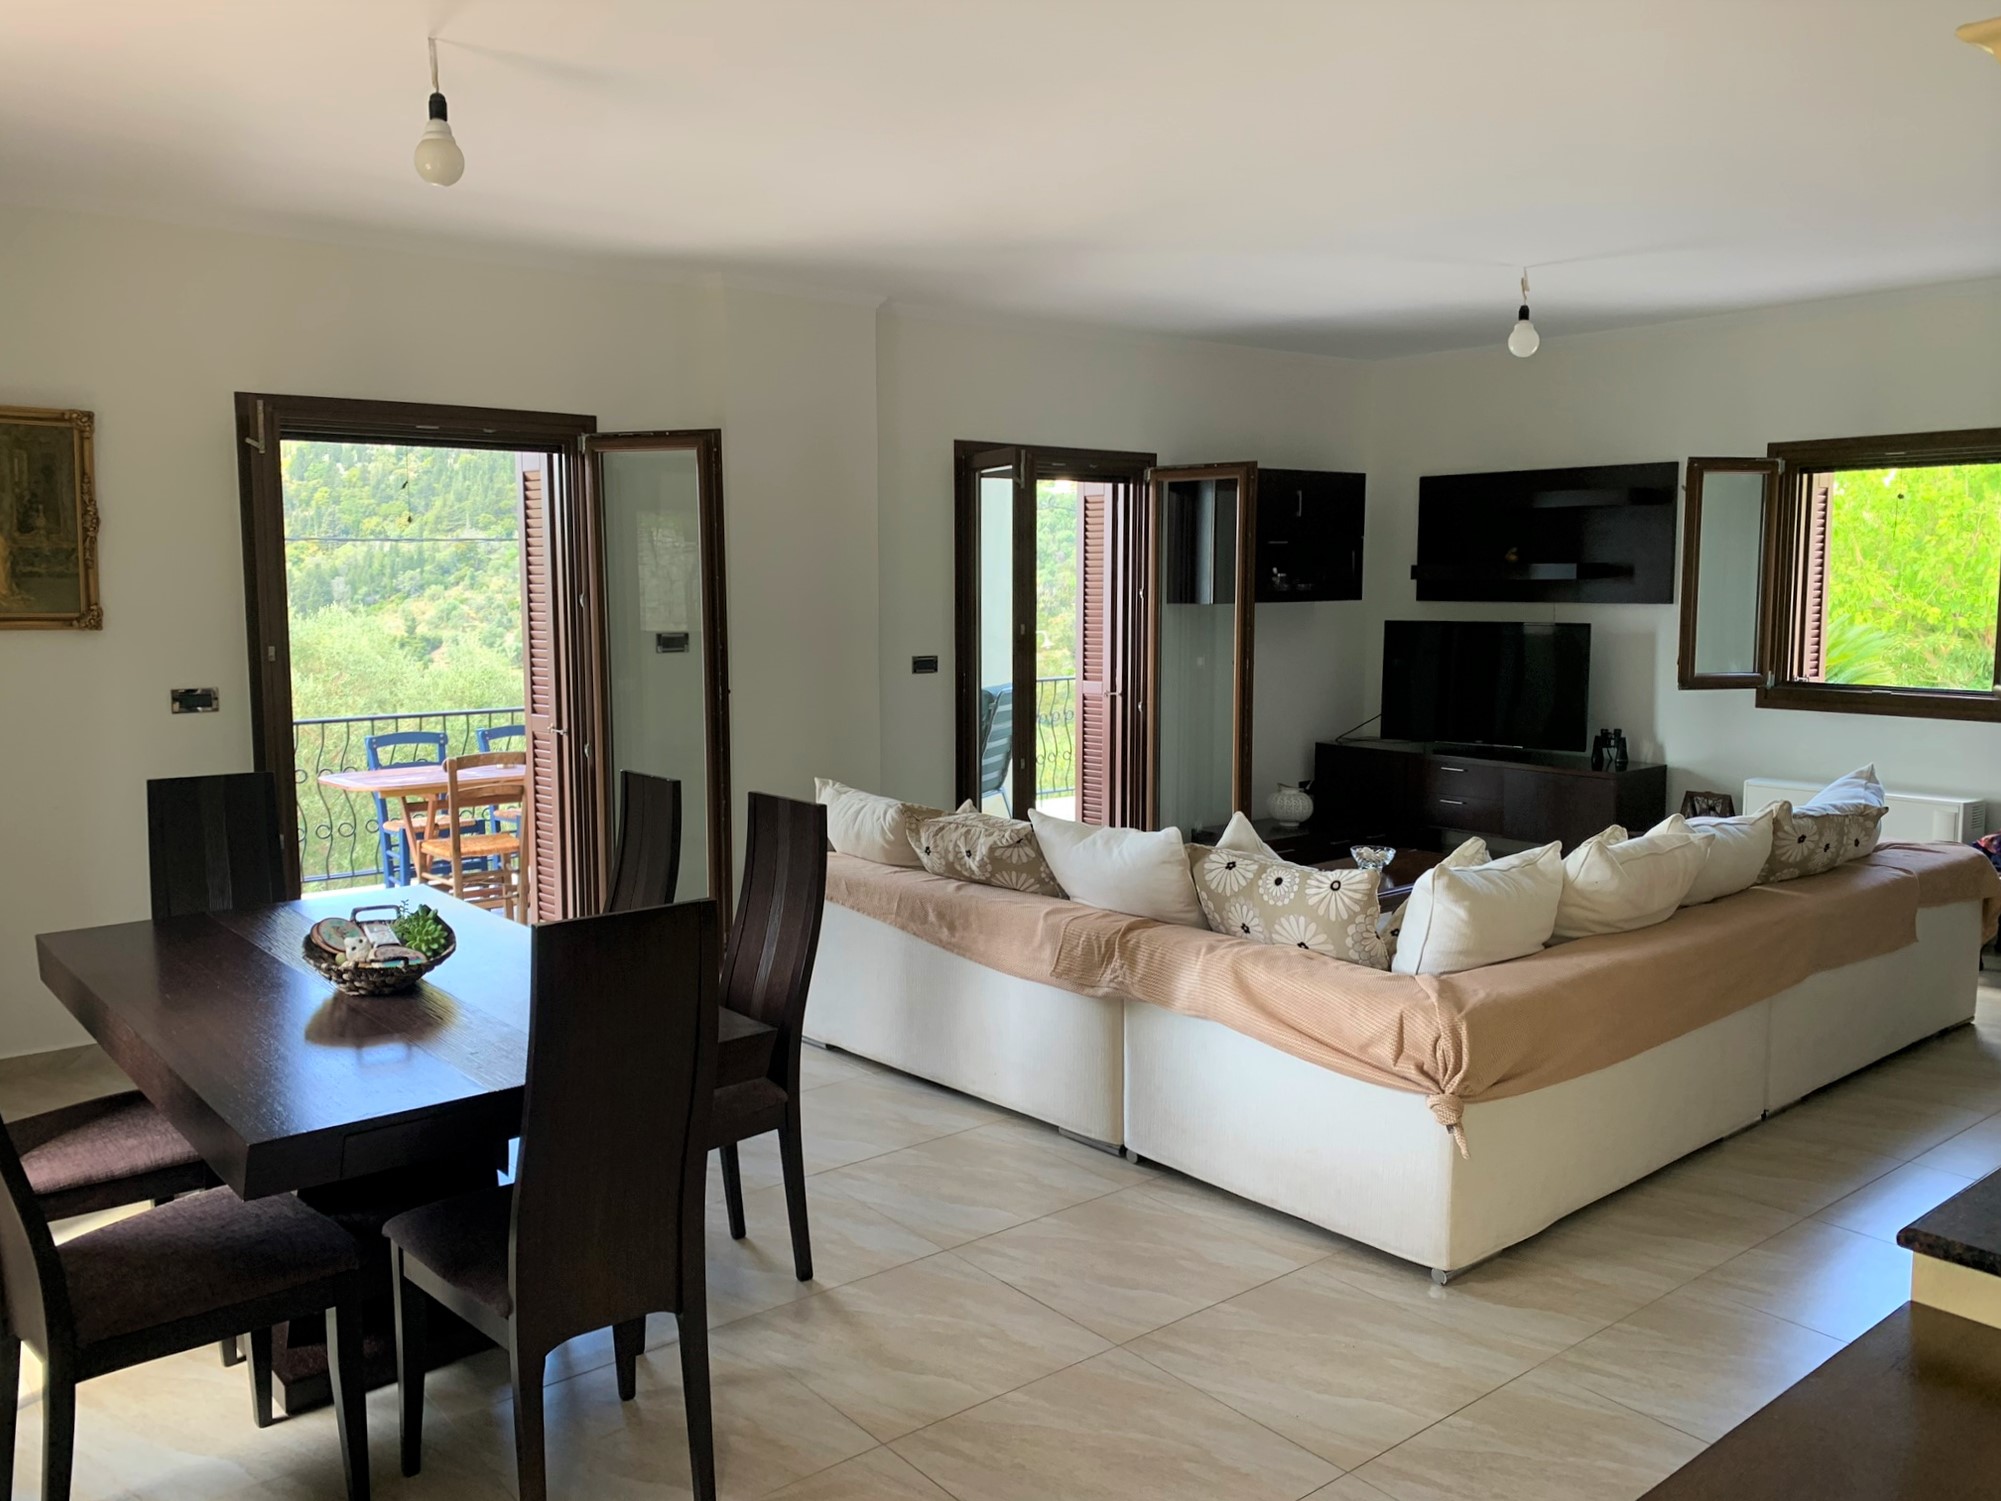 Living room of house for rent on Ithaca Greece, Stavros